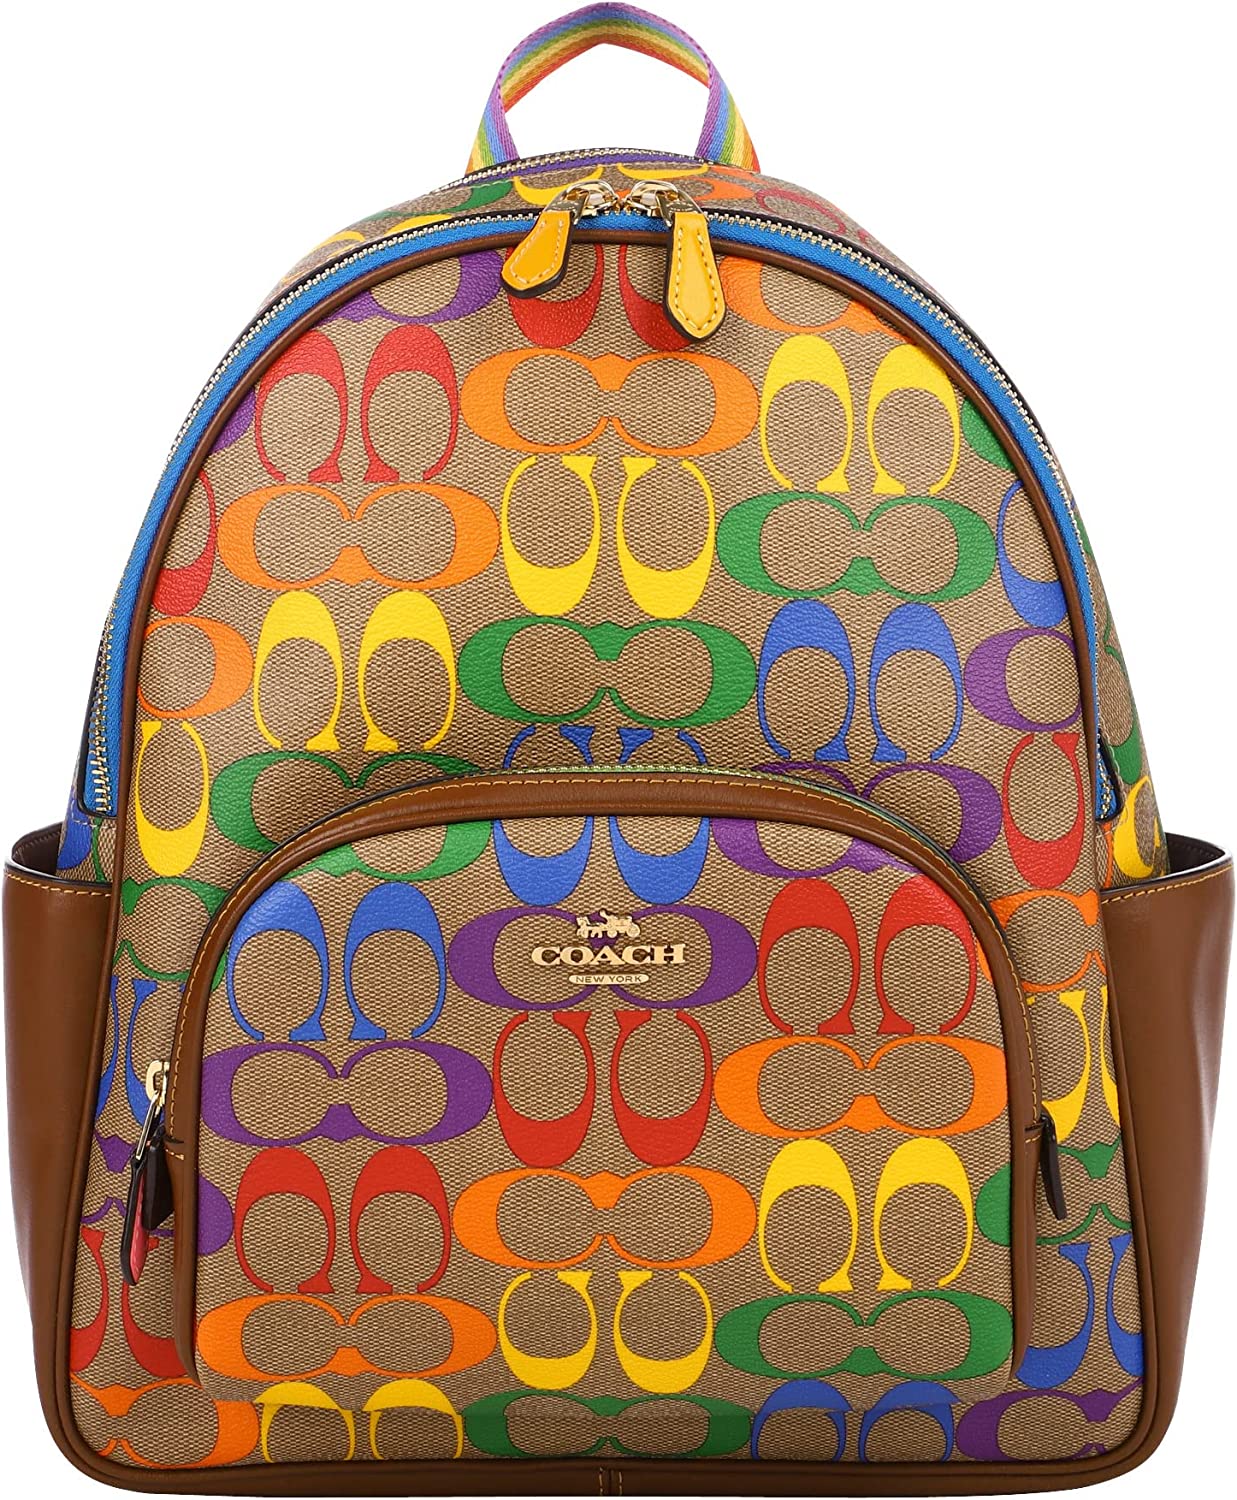 BALO NỮ CẦU VỒNG COACH COURT BACKPACK IN RAINBOW SIGNATURE CANVAS CA140 11